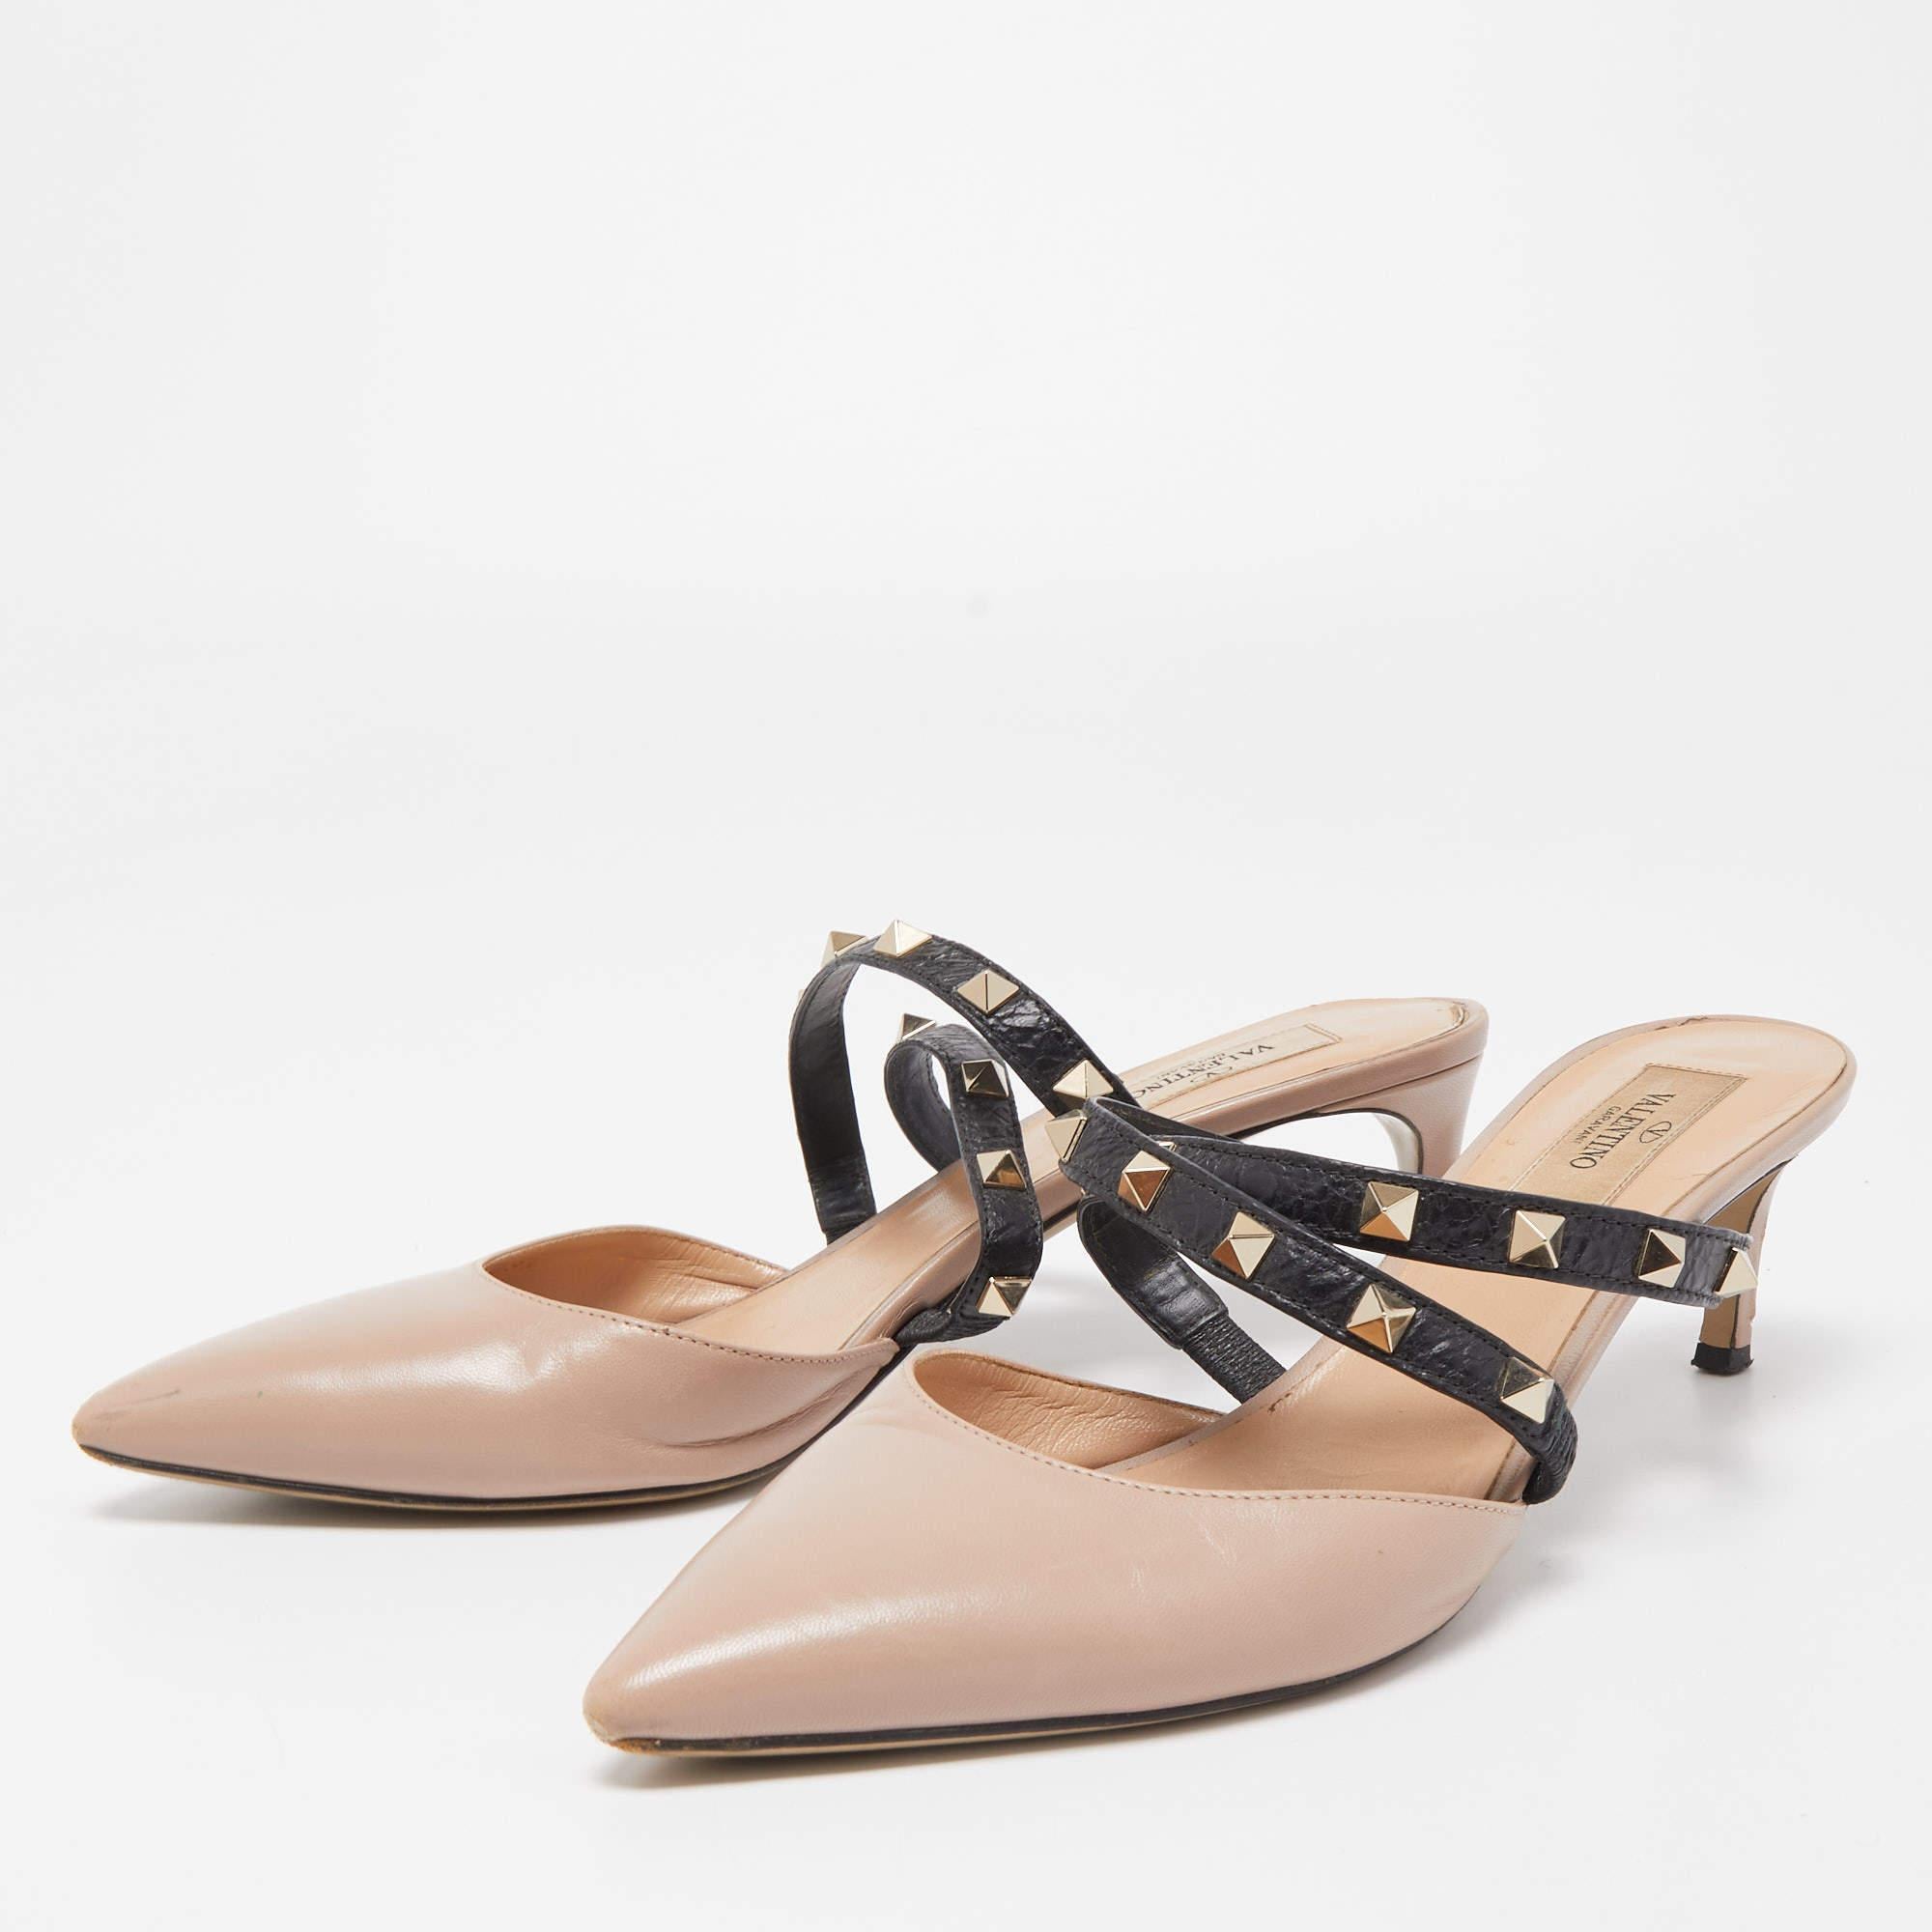 Lift your look without compromising on comfort when you slip into these mules. Made from the finest material, the mules are perfect for any occasion and will leave you feeling confident each time you slip them on.

